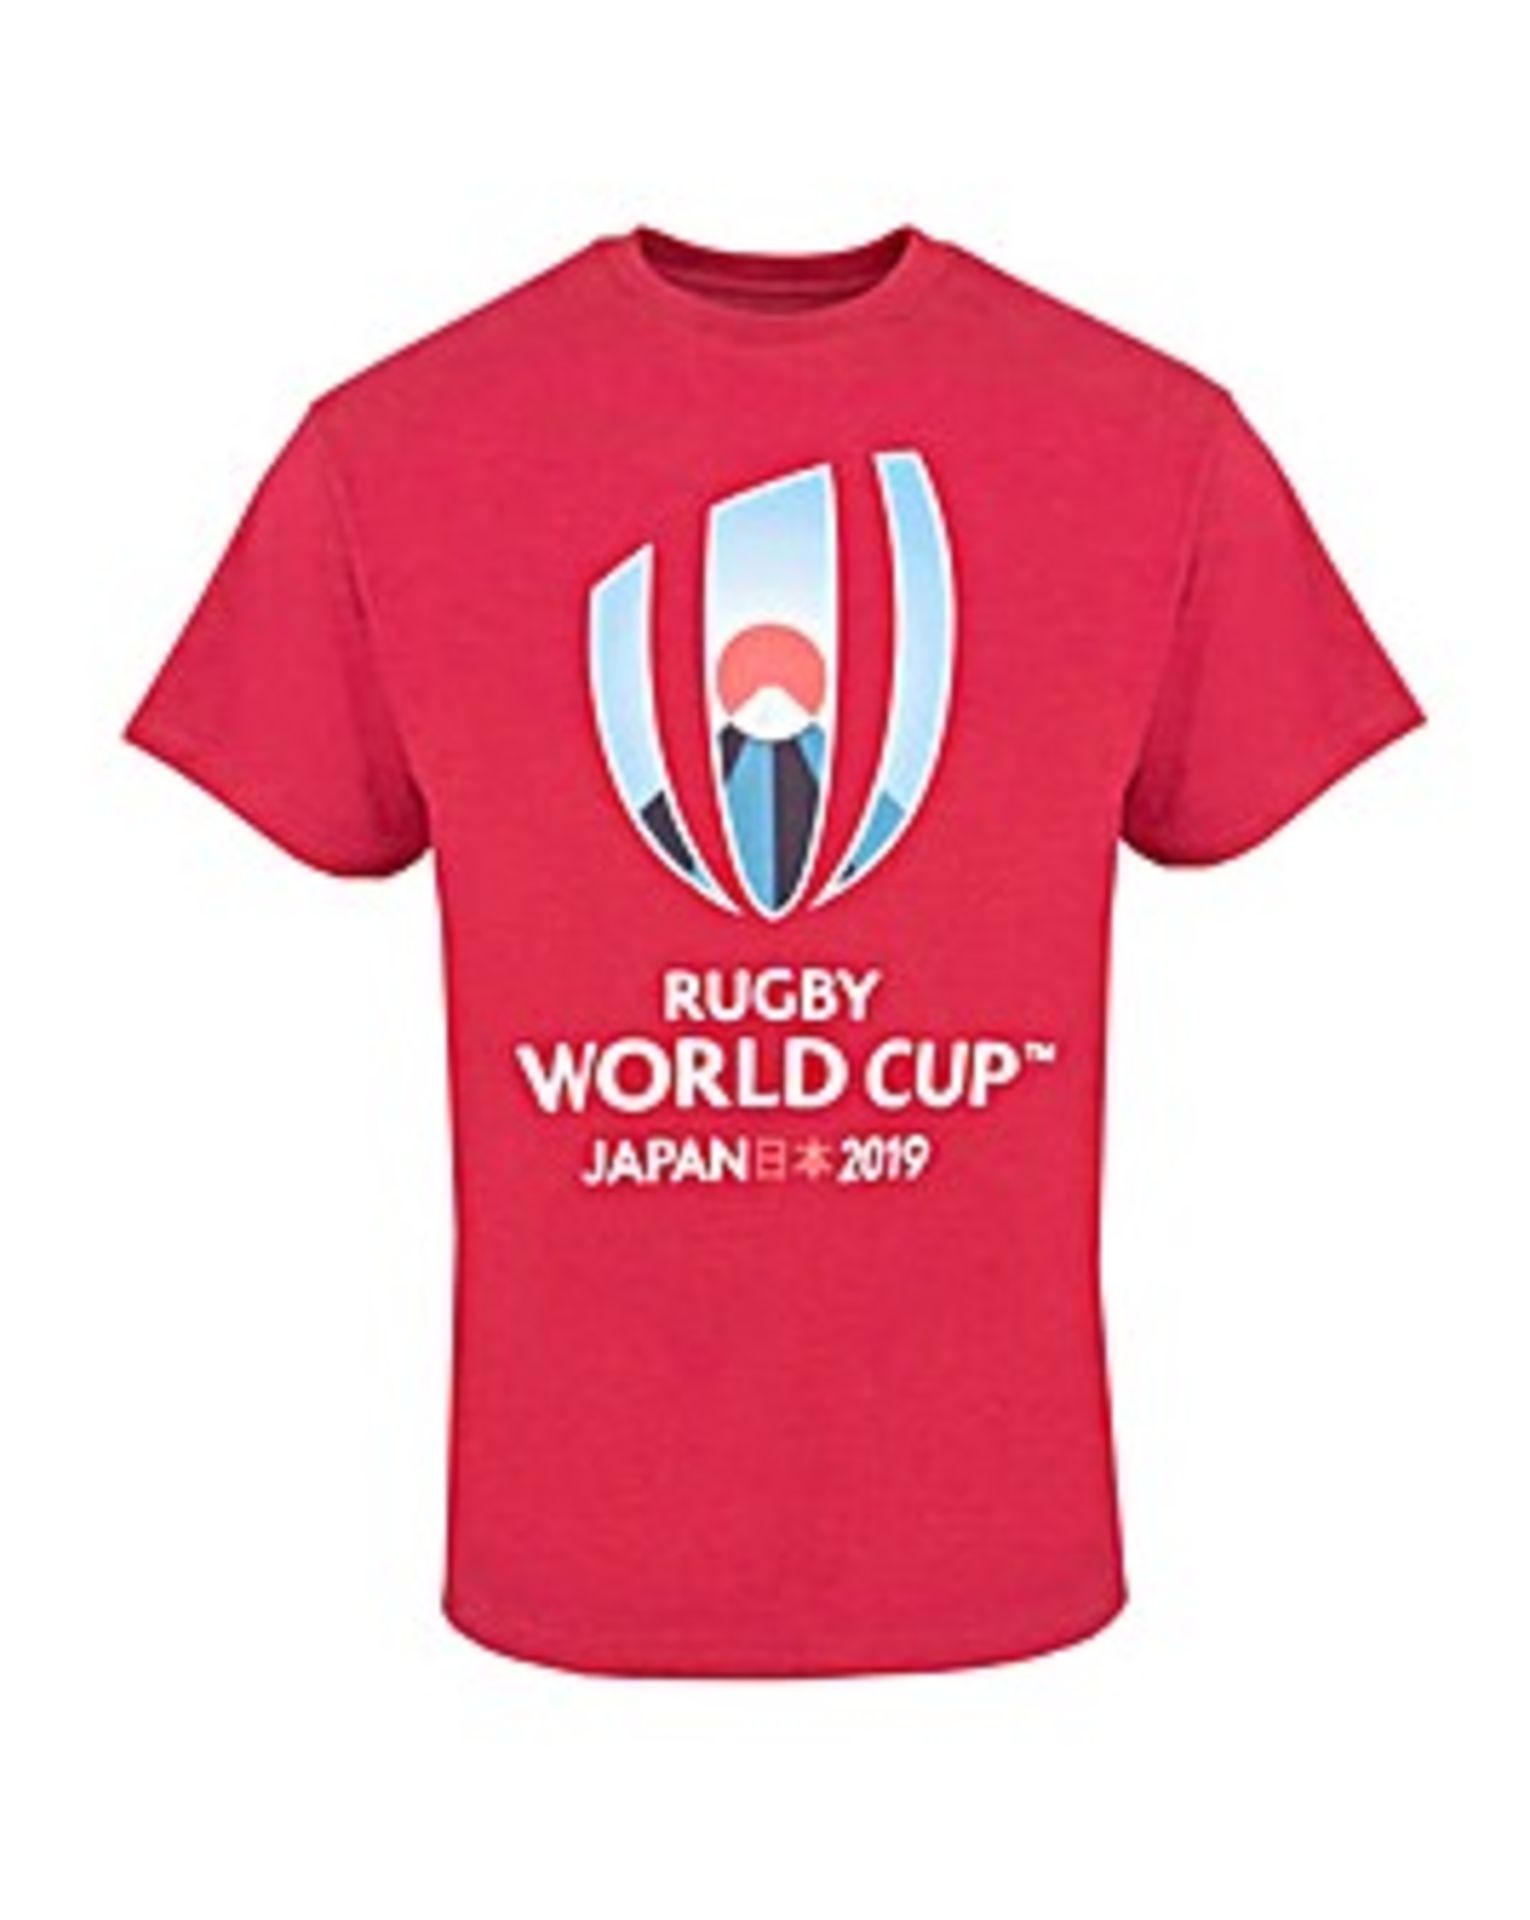 BRAND NEW RUGBY JAPAN 2019 T-SHIRT SIZE XL Condition ReportBRAND NEW